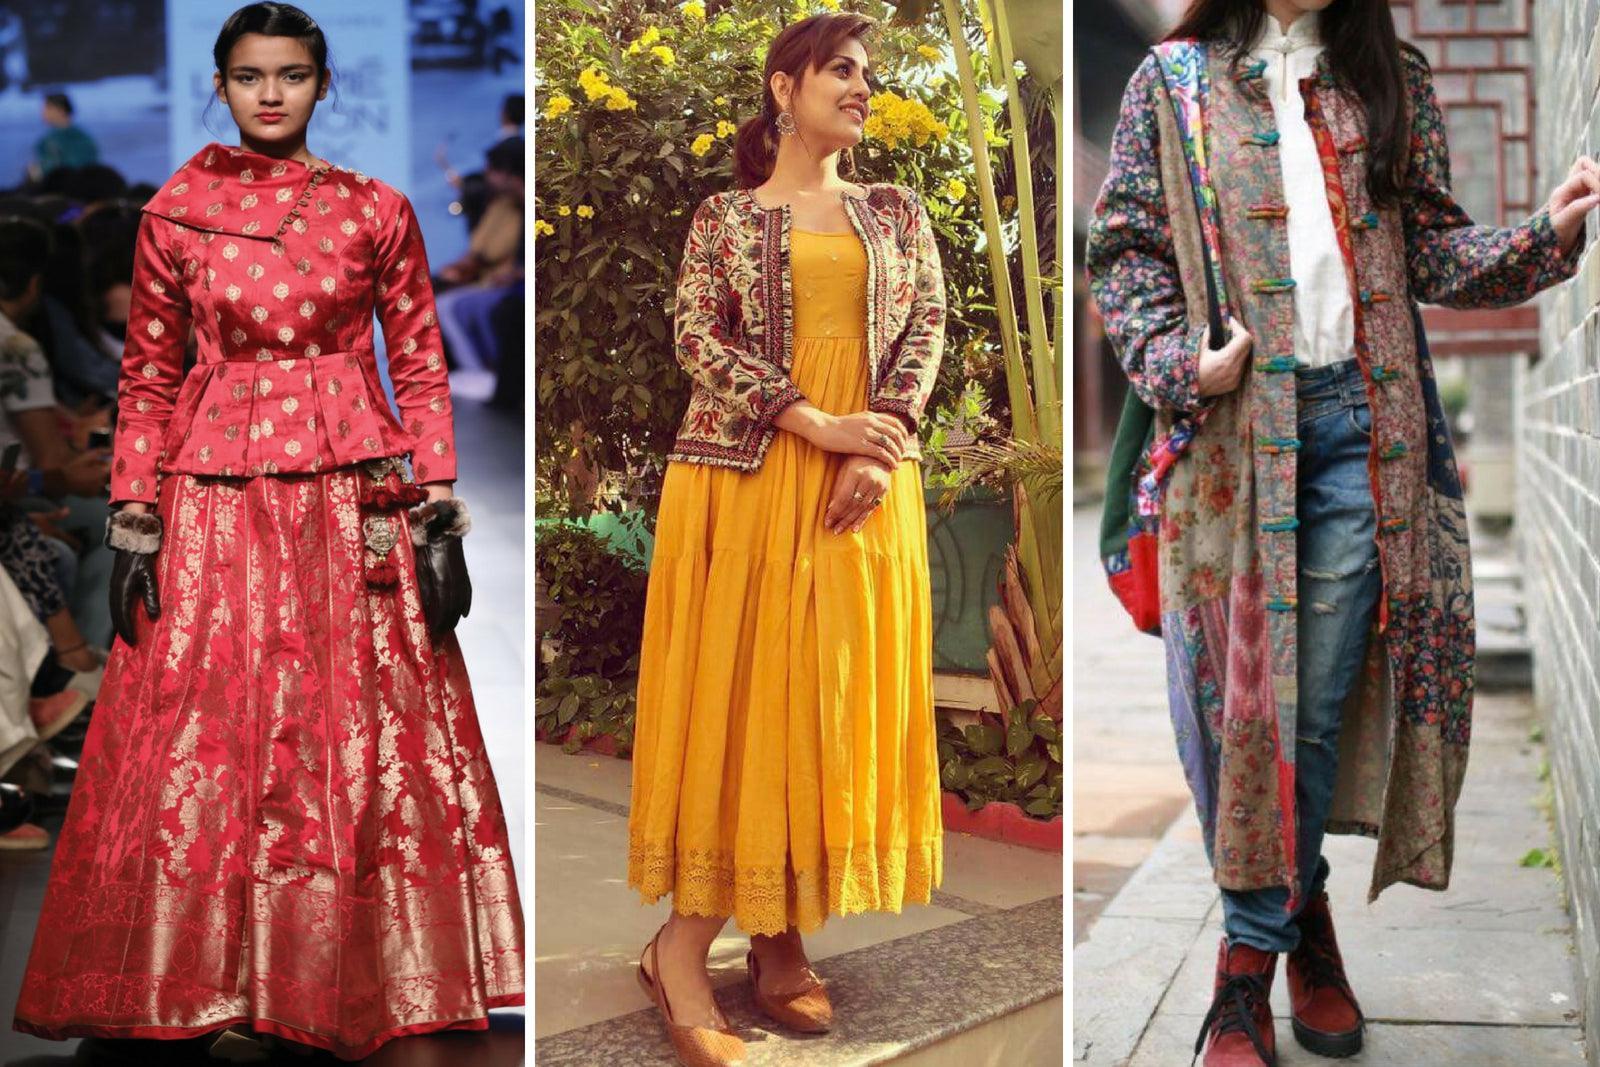 Style Guide To Winter Indian Wear: What To Wear And How To Dress